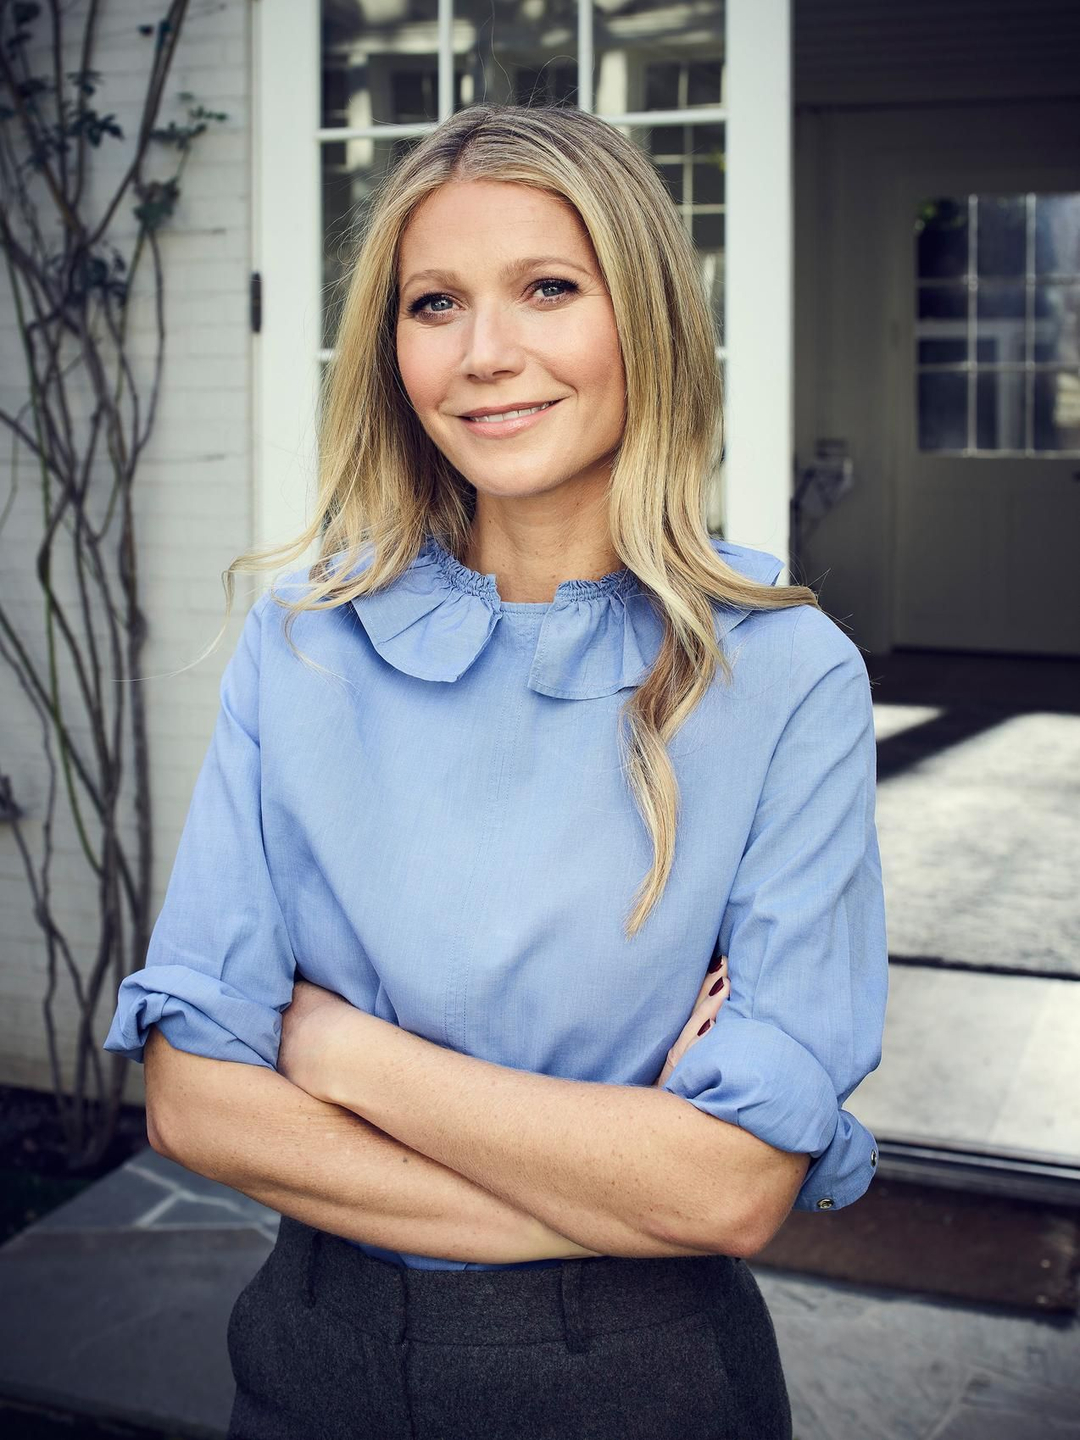 Gwyneth Paltrow who are her parents